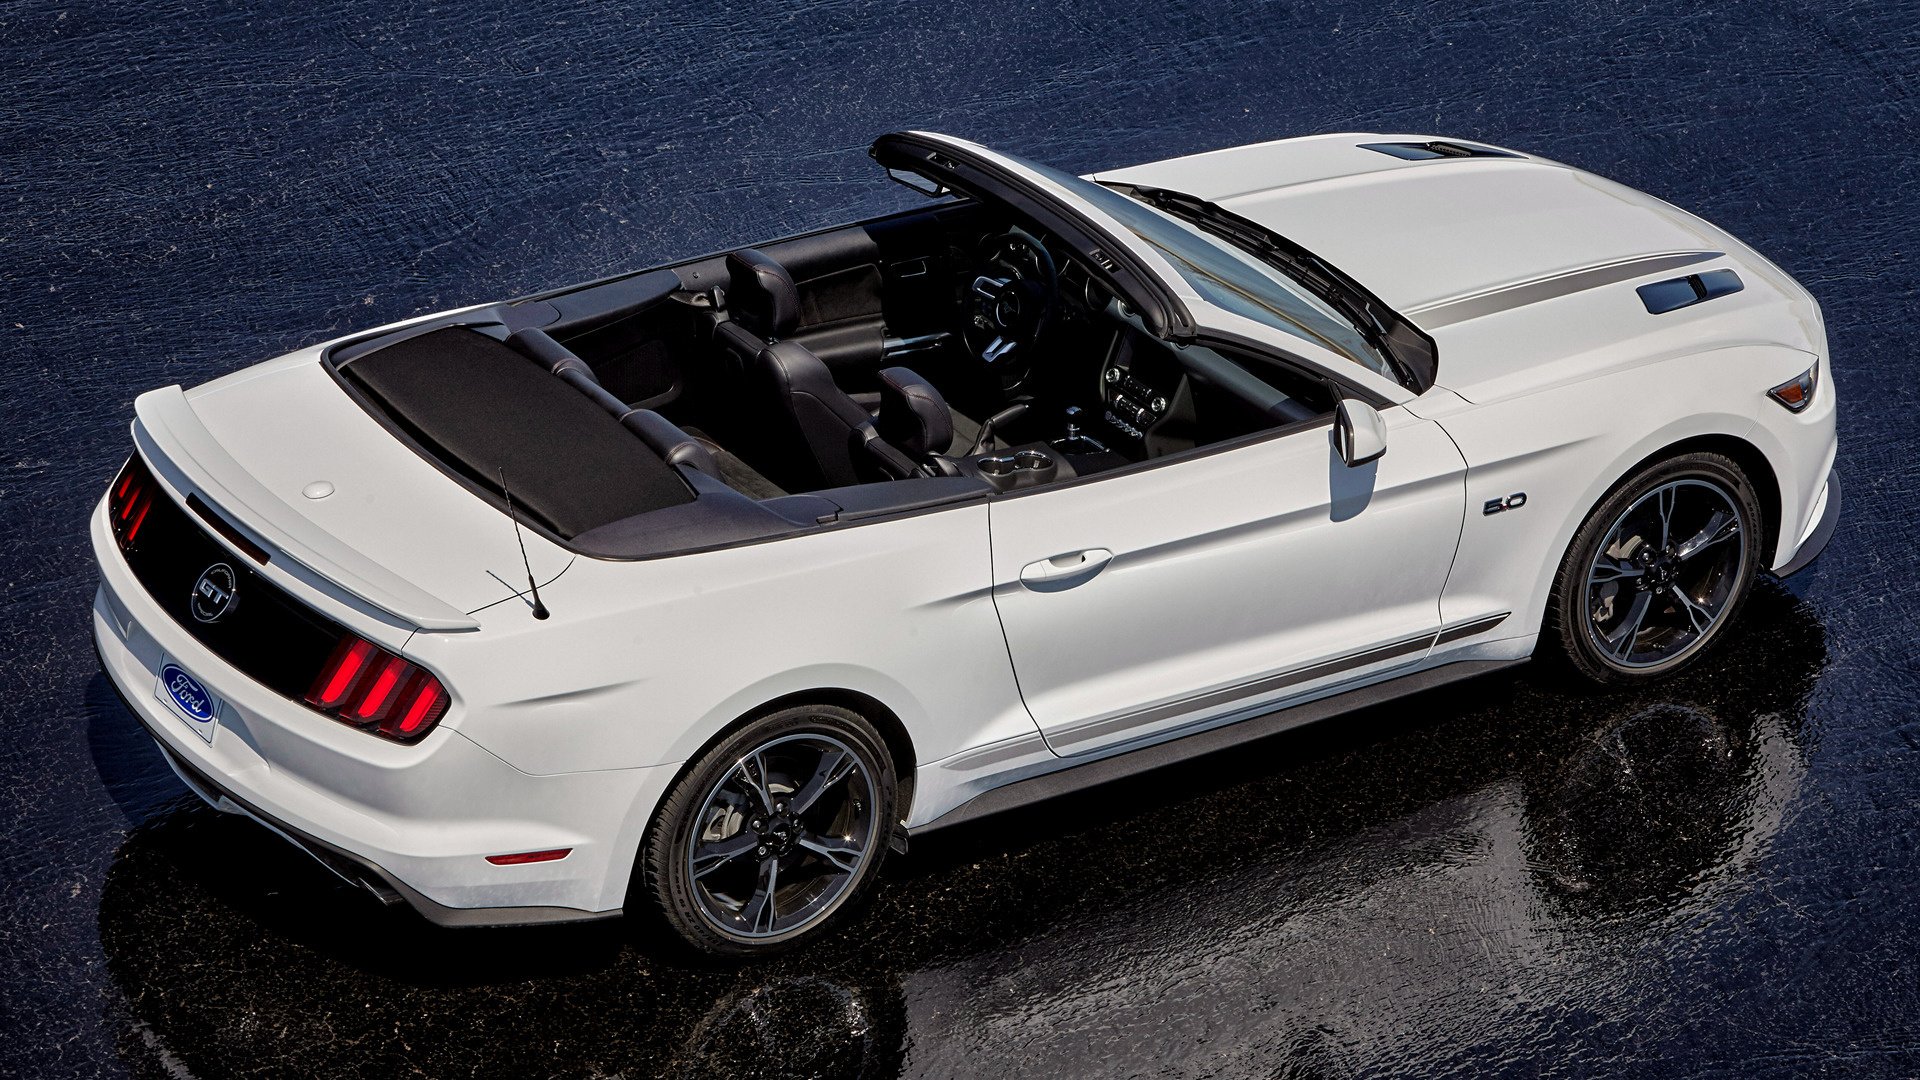 2016 Ford Mustang Gt Convertible California Special Hd Wallpaper Background Image 1920x1080